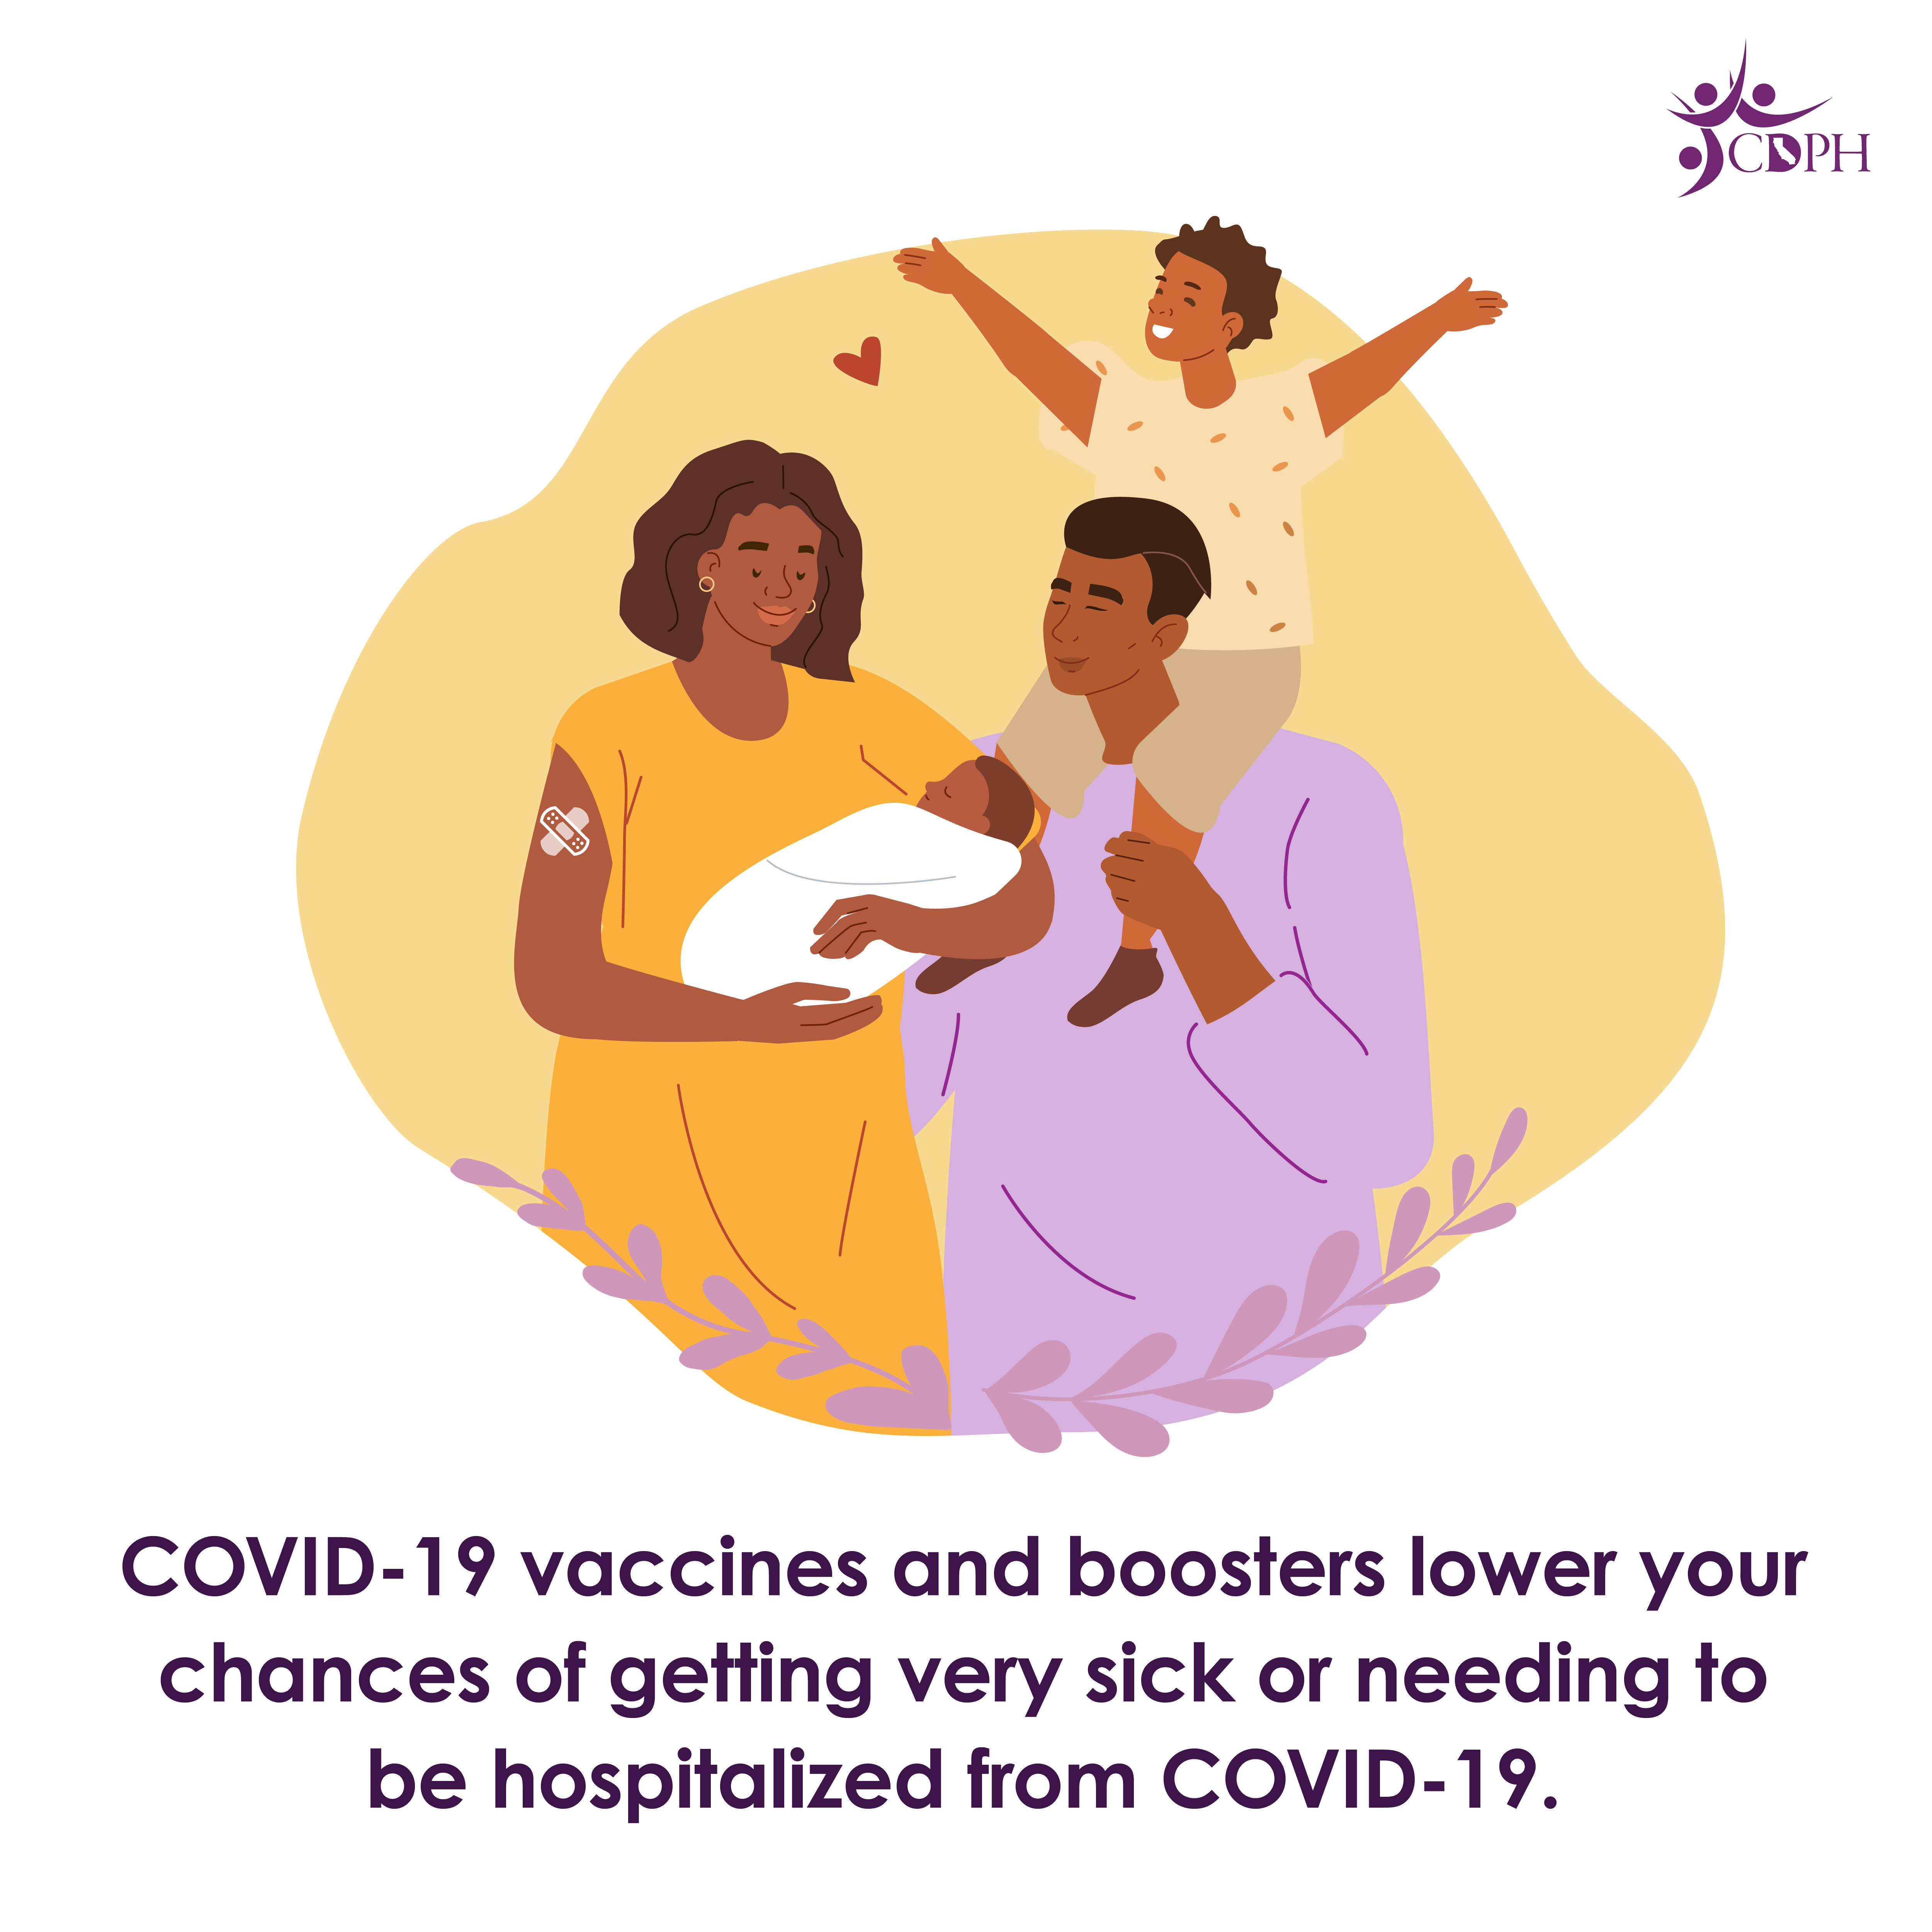 COVID-19 vaccines and boosters lower your chances of getting very sick or needing to be hospitalized from COVID-19